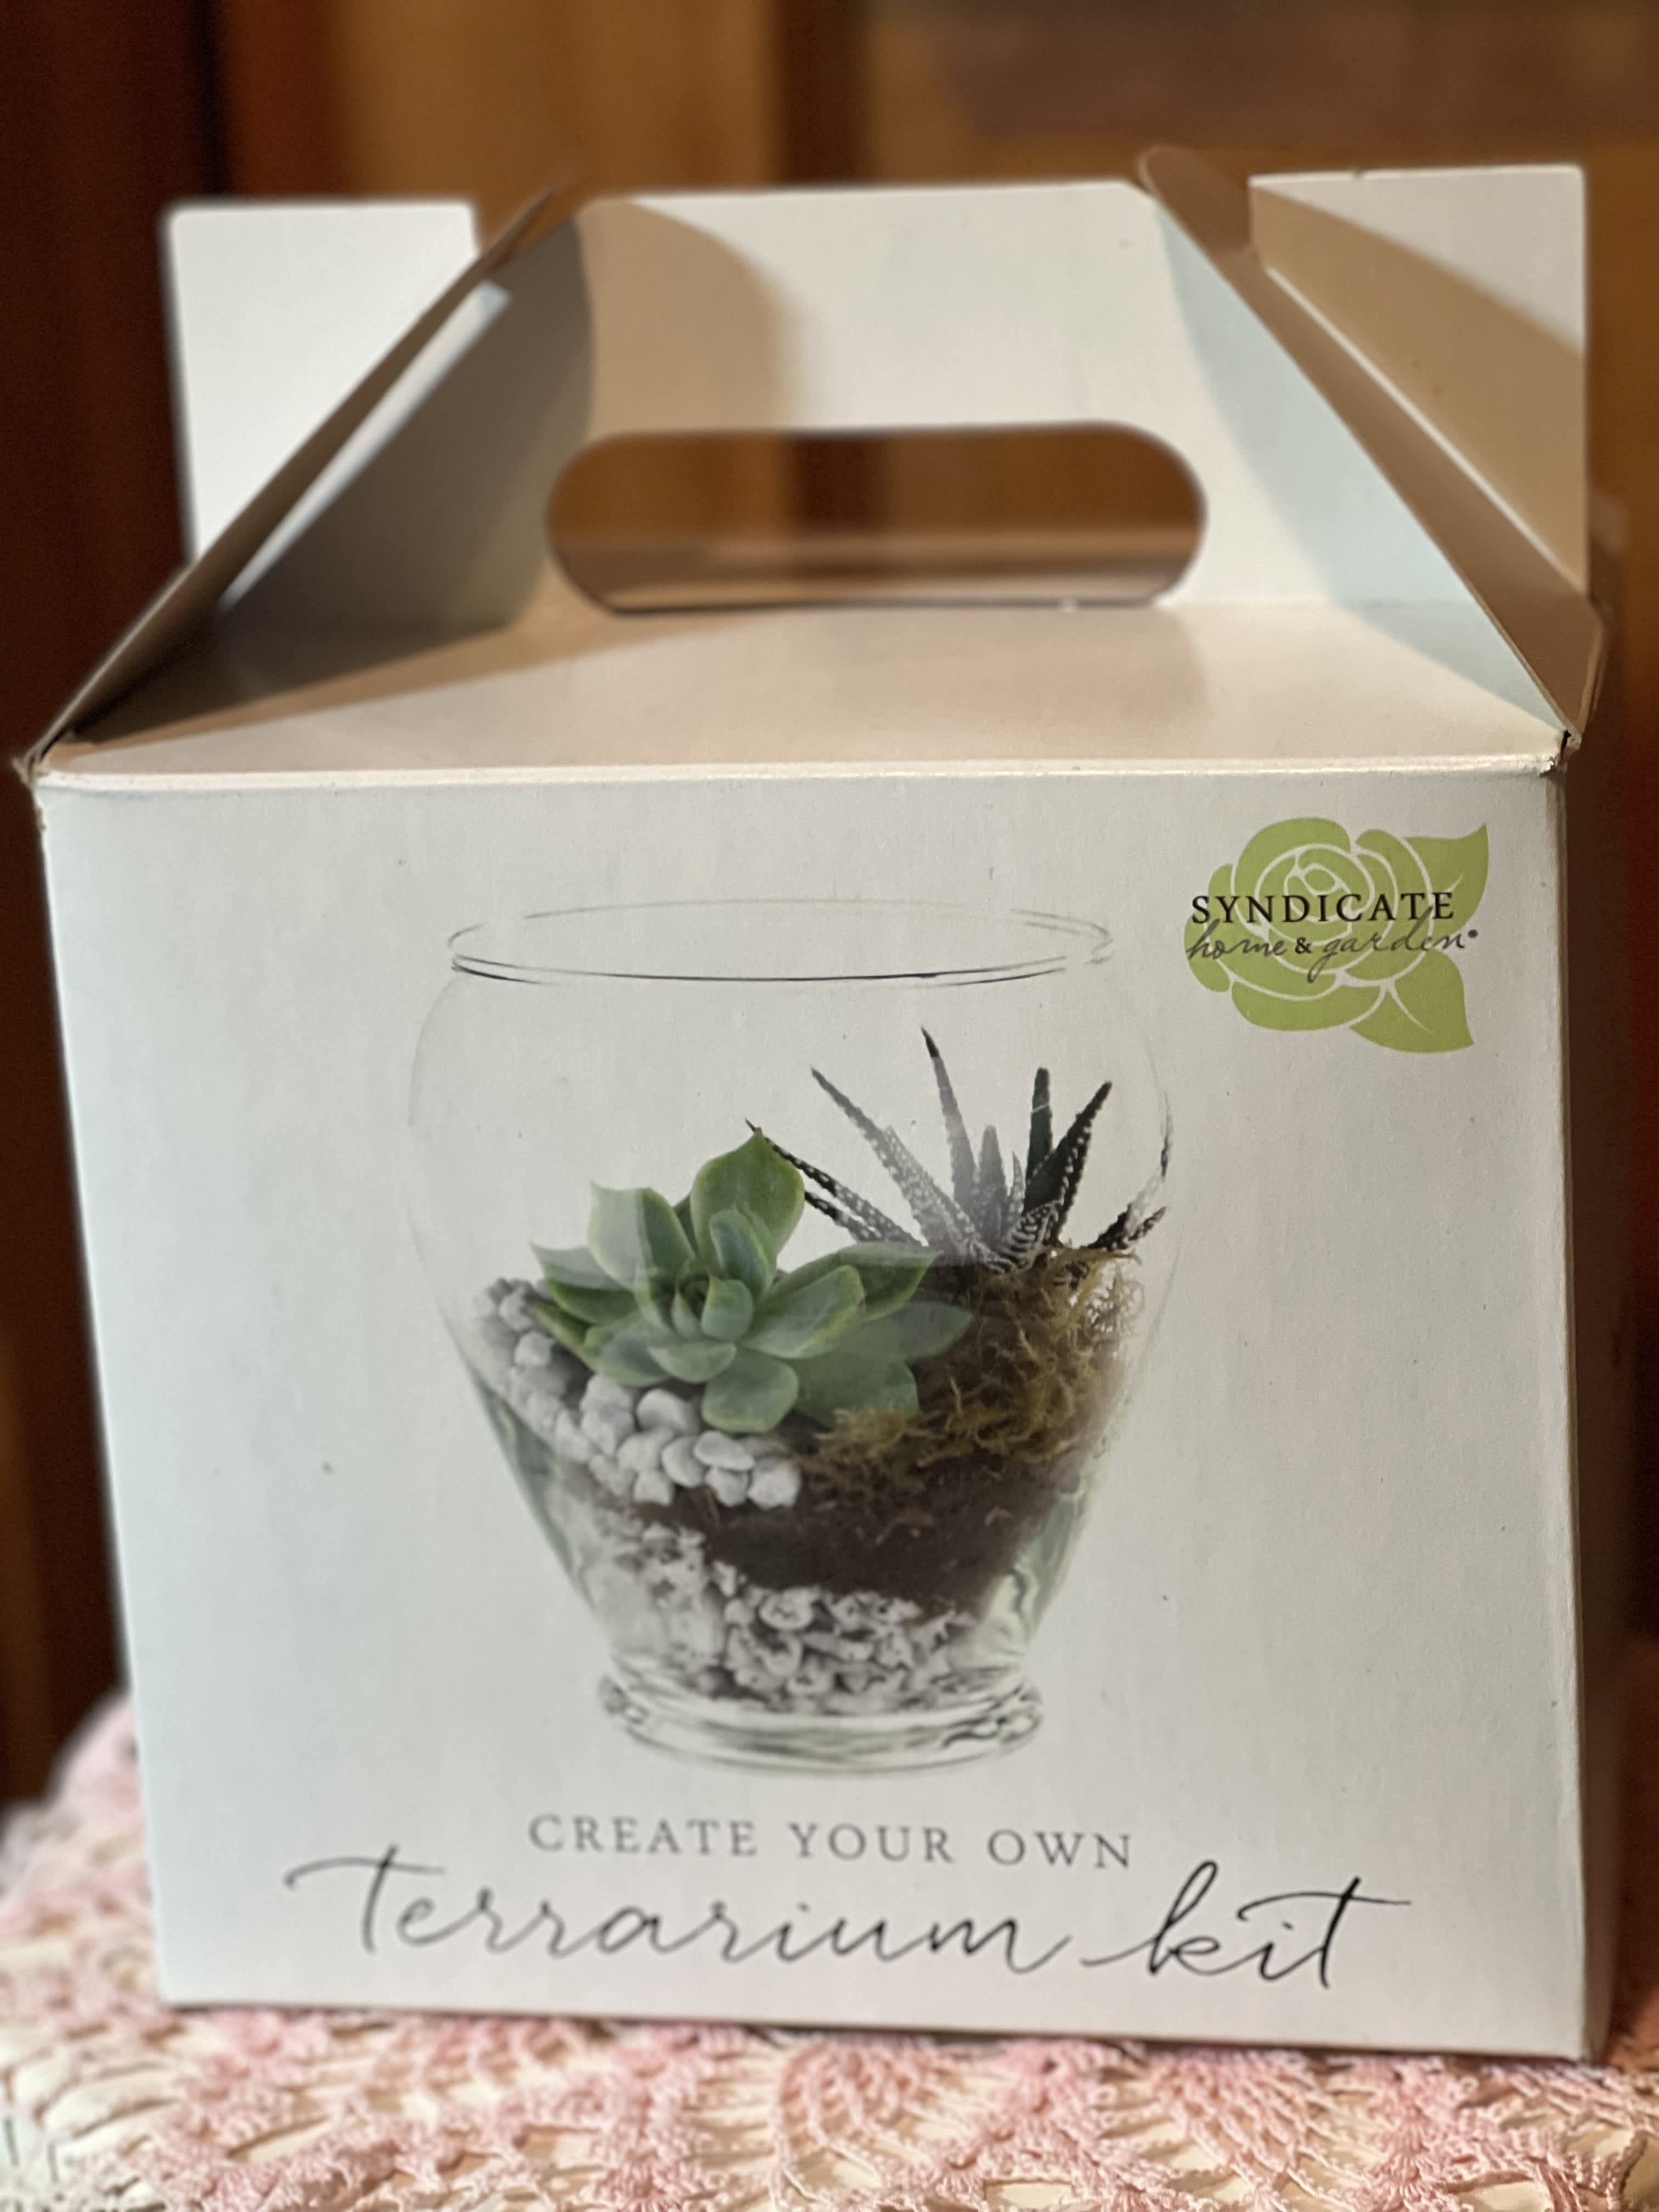 Terrarium Kit - This giftable kit has all the makings of a lush, living terrarium. Just add your favorite plant and cultivate an indoor garden that will flourish throughout the year. Perfect for adding a slice of nature to any desktop or coffee table. Keep your terrarium thriving with simple assembly and minimal maintenance. Charming hand-illustrated packaging makes this a lovely gift. We recommend pairing with our Terrarium Tool Kit to create the perfect design! Includes modern glass vessel Includes drainage stone, soil and moss Use stones as base, then layer soil and moss Crafted from recycled material Packaged in a box with a convenient handle for easy gifting Product Dimensions  Height: 5.75 in Length: 7.5 in Width: 5.75 in Weight: 2.5 lbs